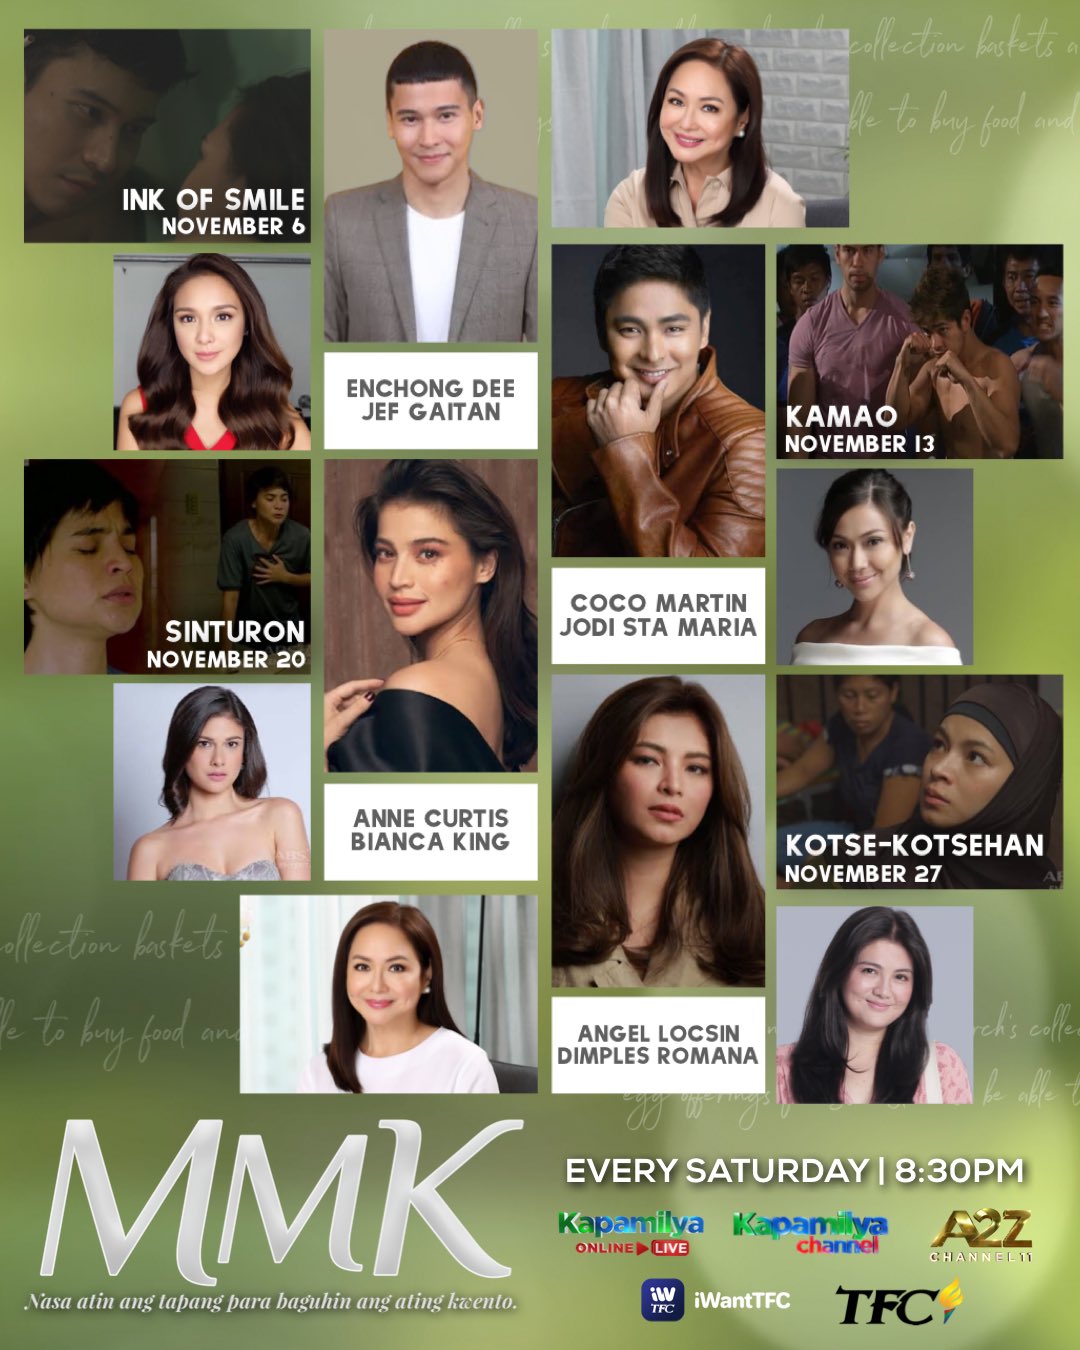 Enchong, Coco, Jodi, Anne,Dimples, and Angel headline "MMK's" 30th anniversary episodes